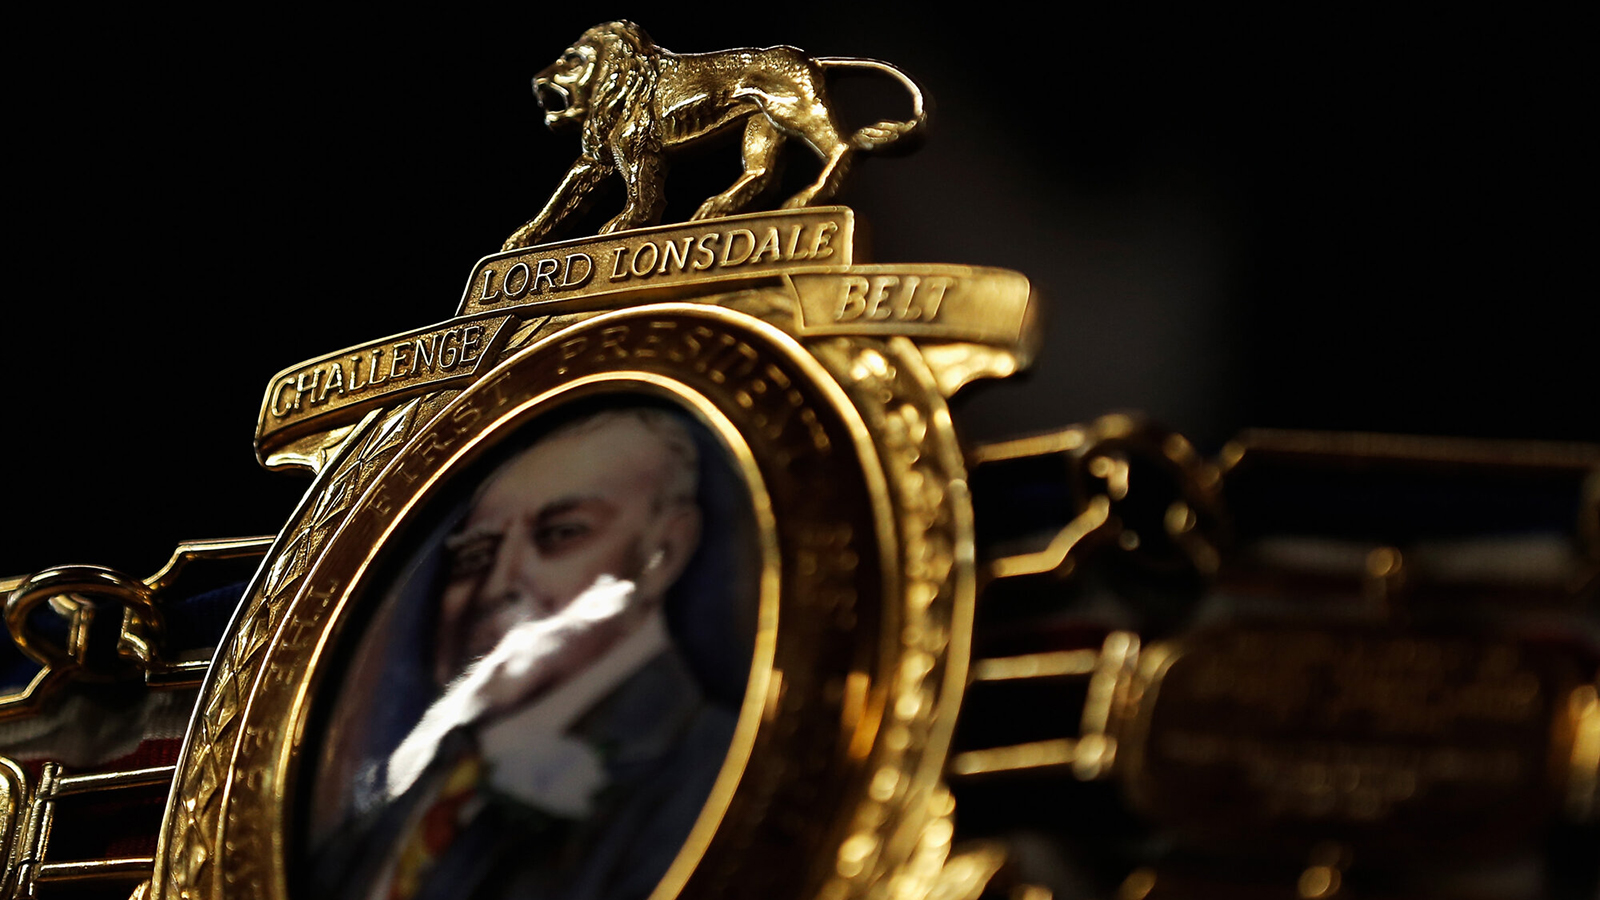 lord lonsdale british boxing belt title